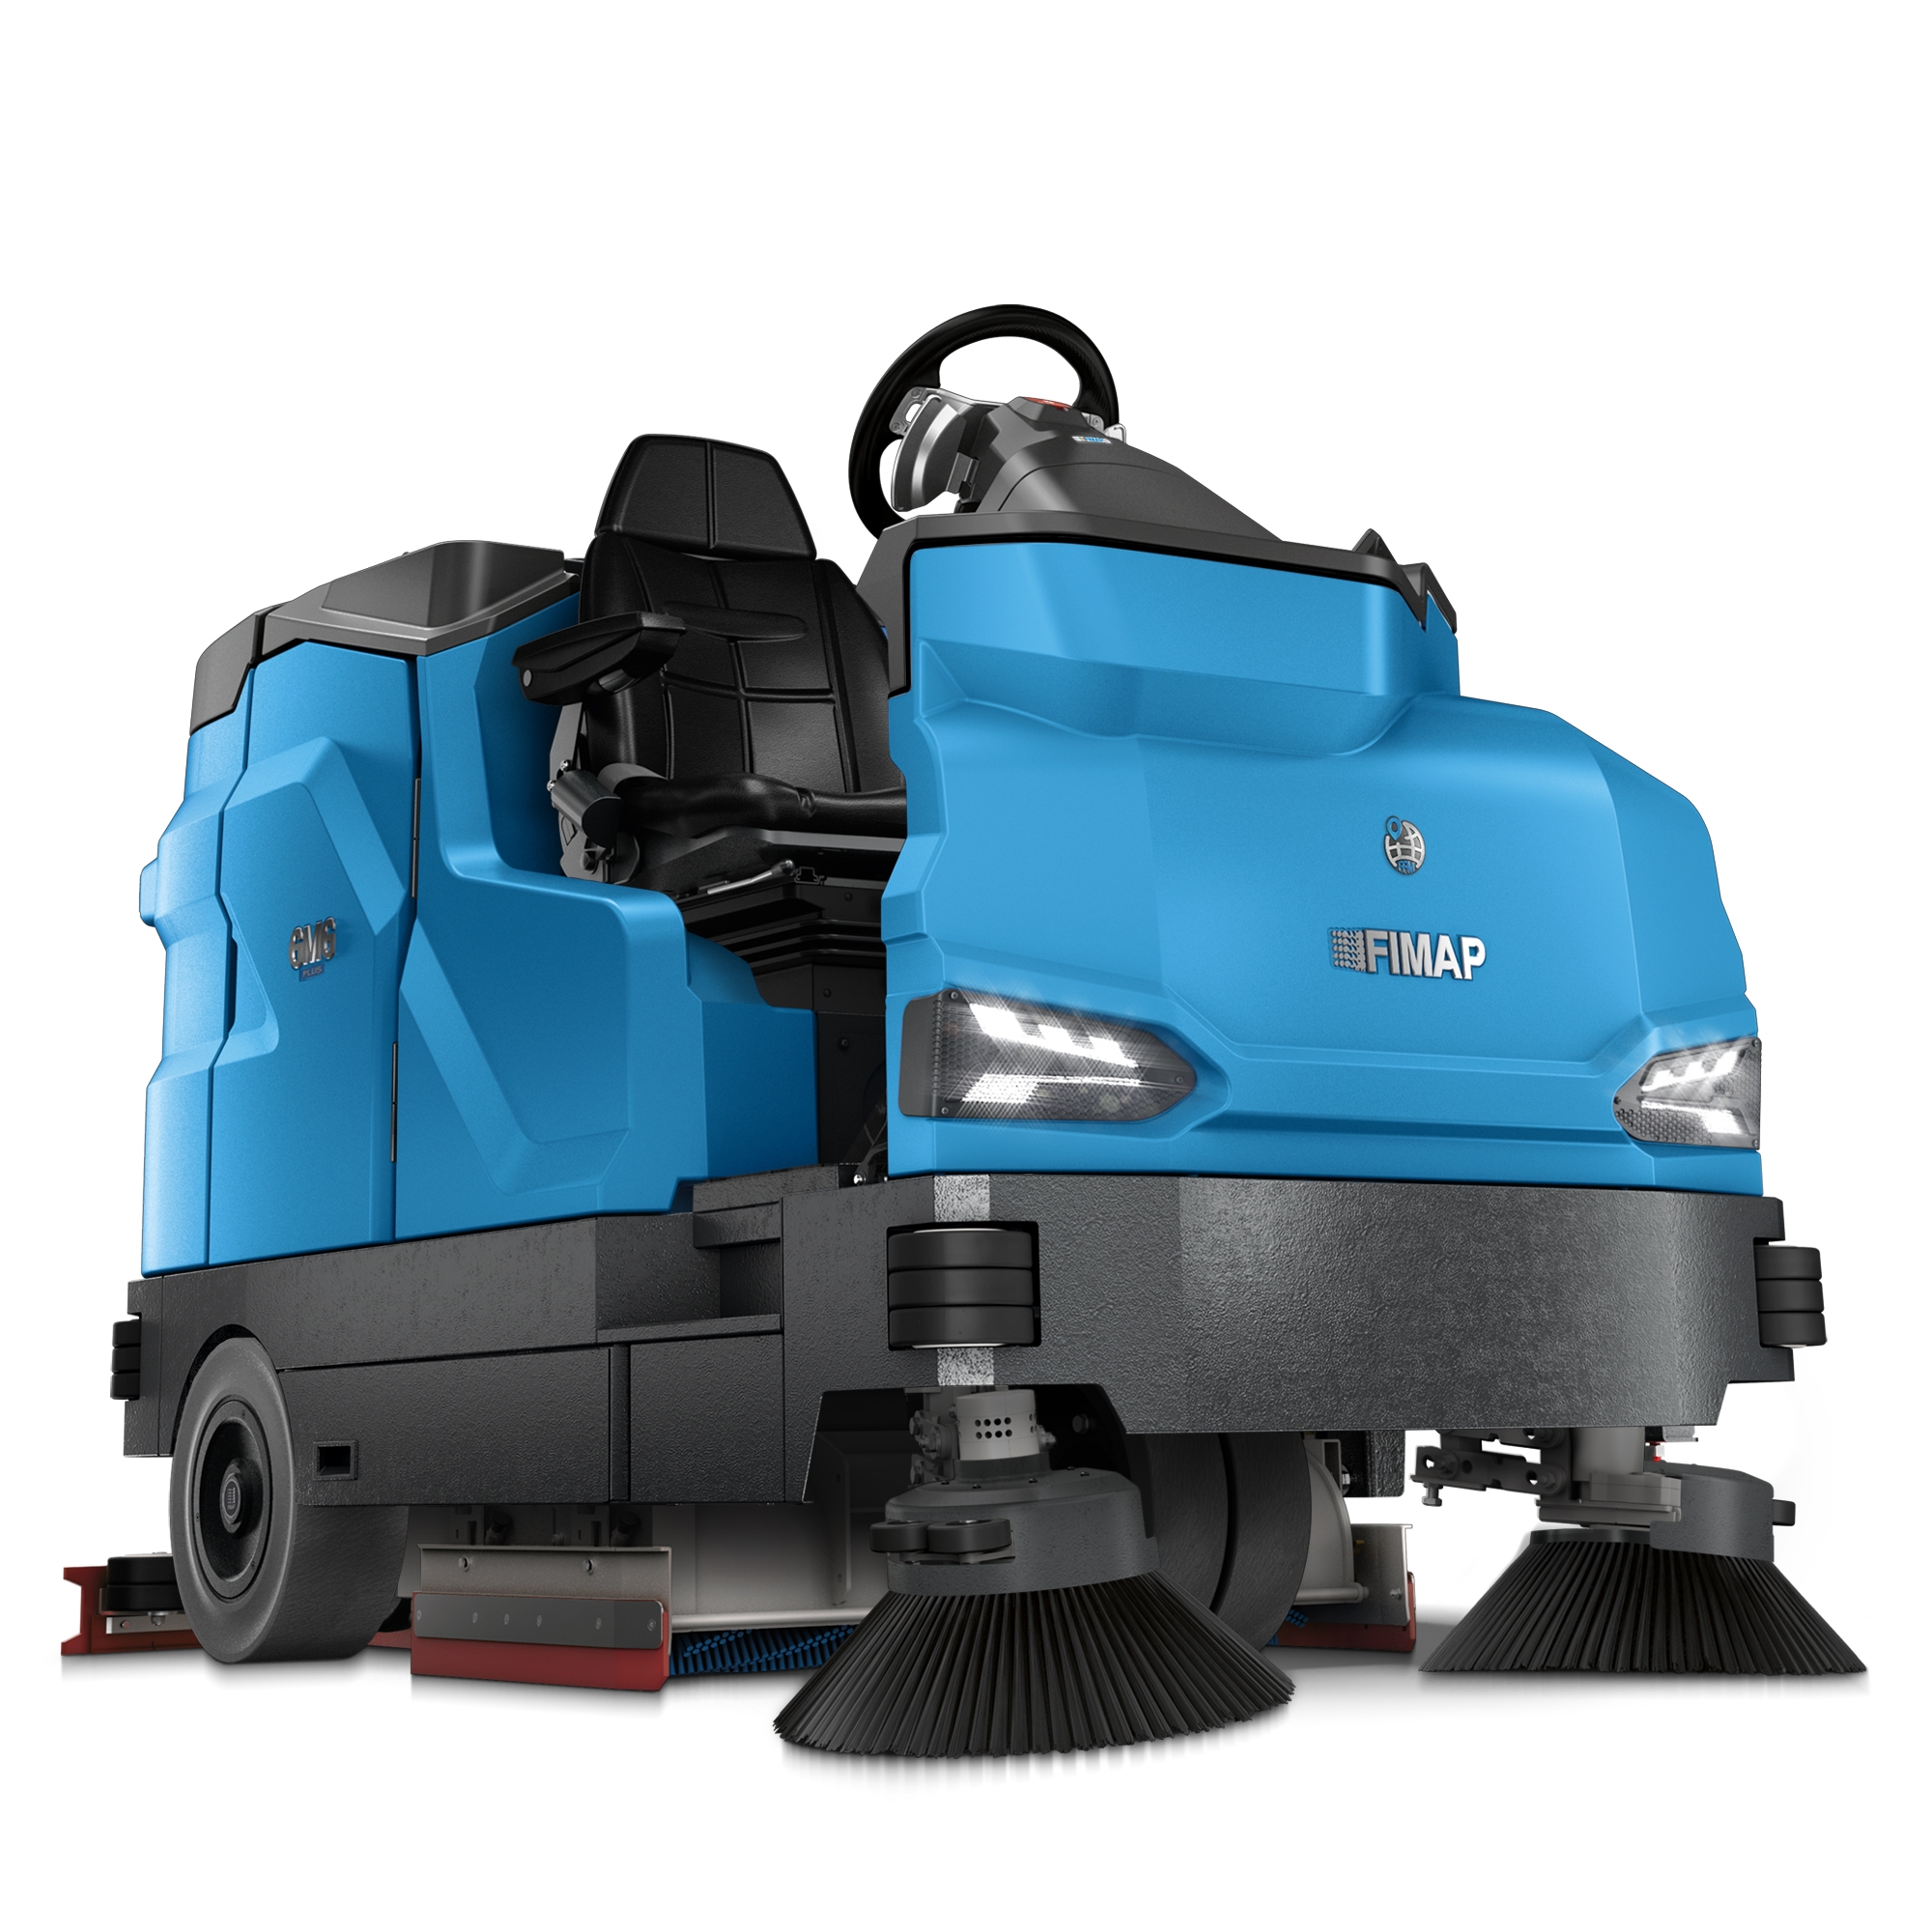 Fimap Gmg Cylindrical Pro Ride-On Scrubber Dryer ( Multifunctional )